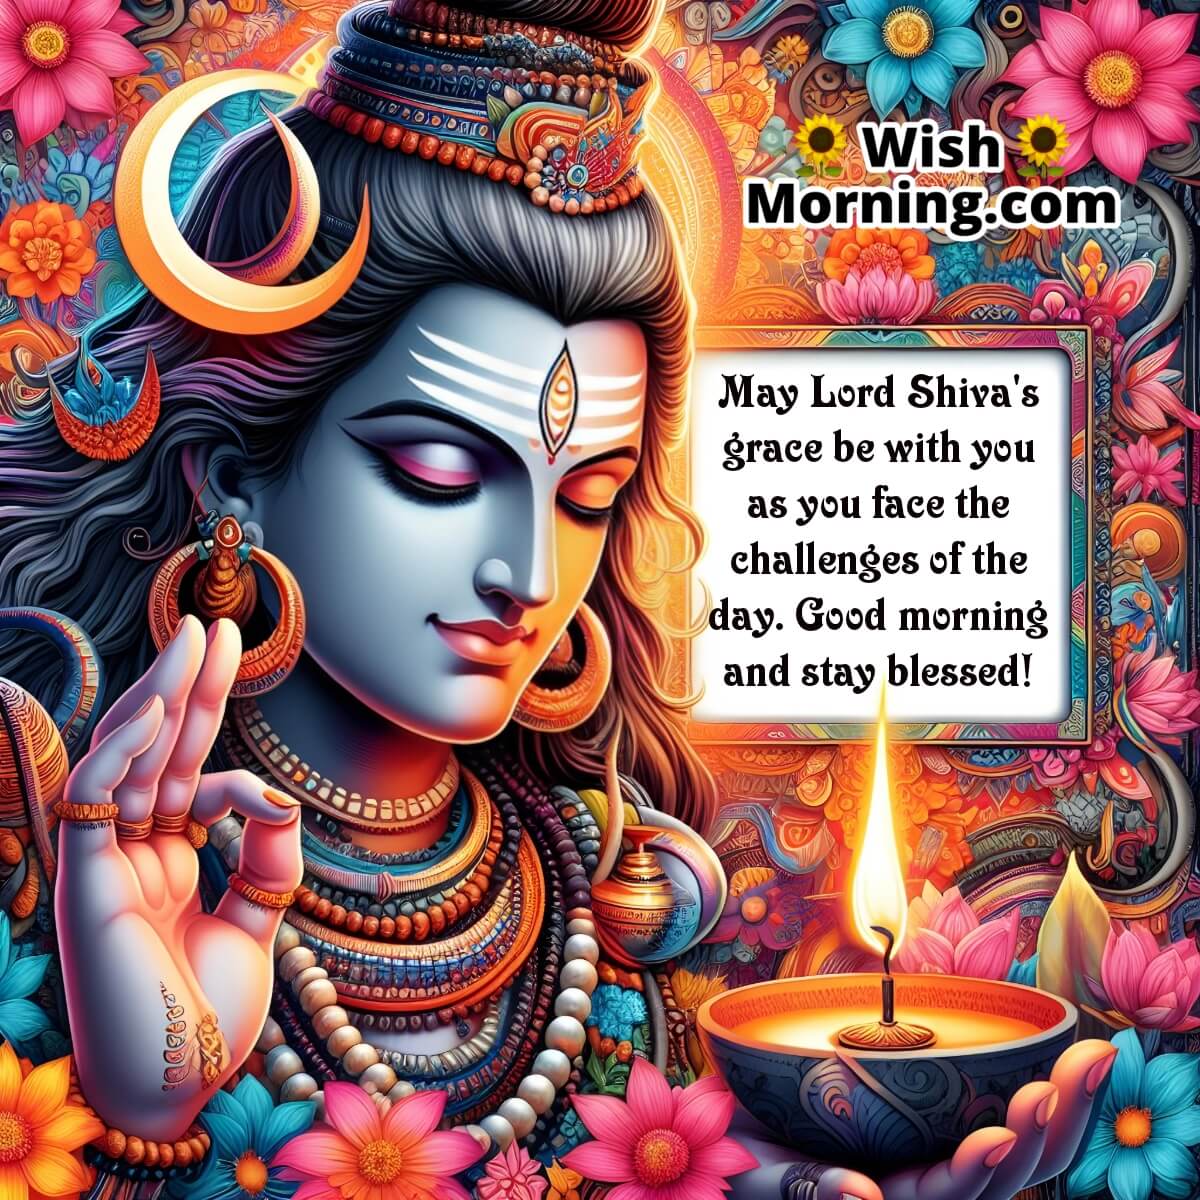 Good Morning Lord Shiva Blessed Day